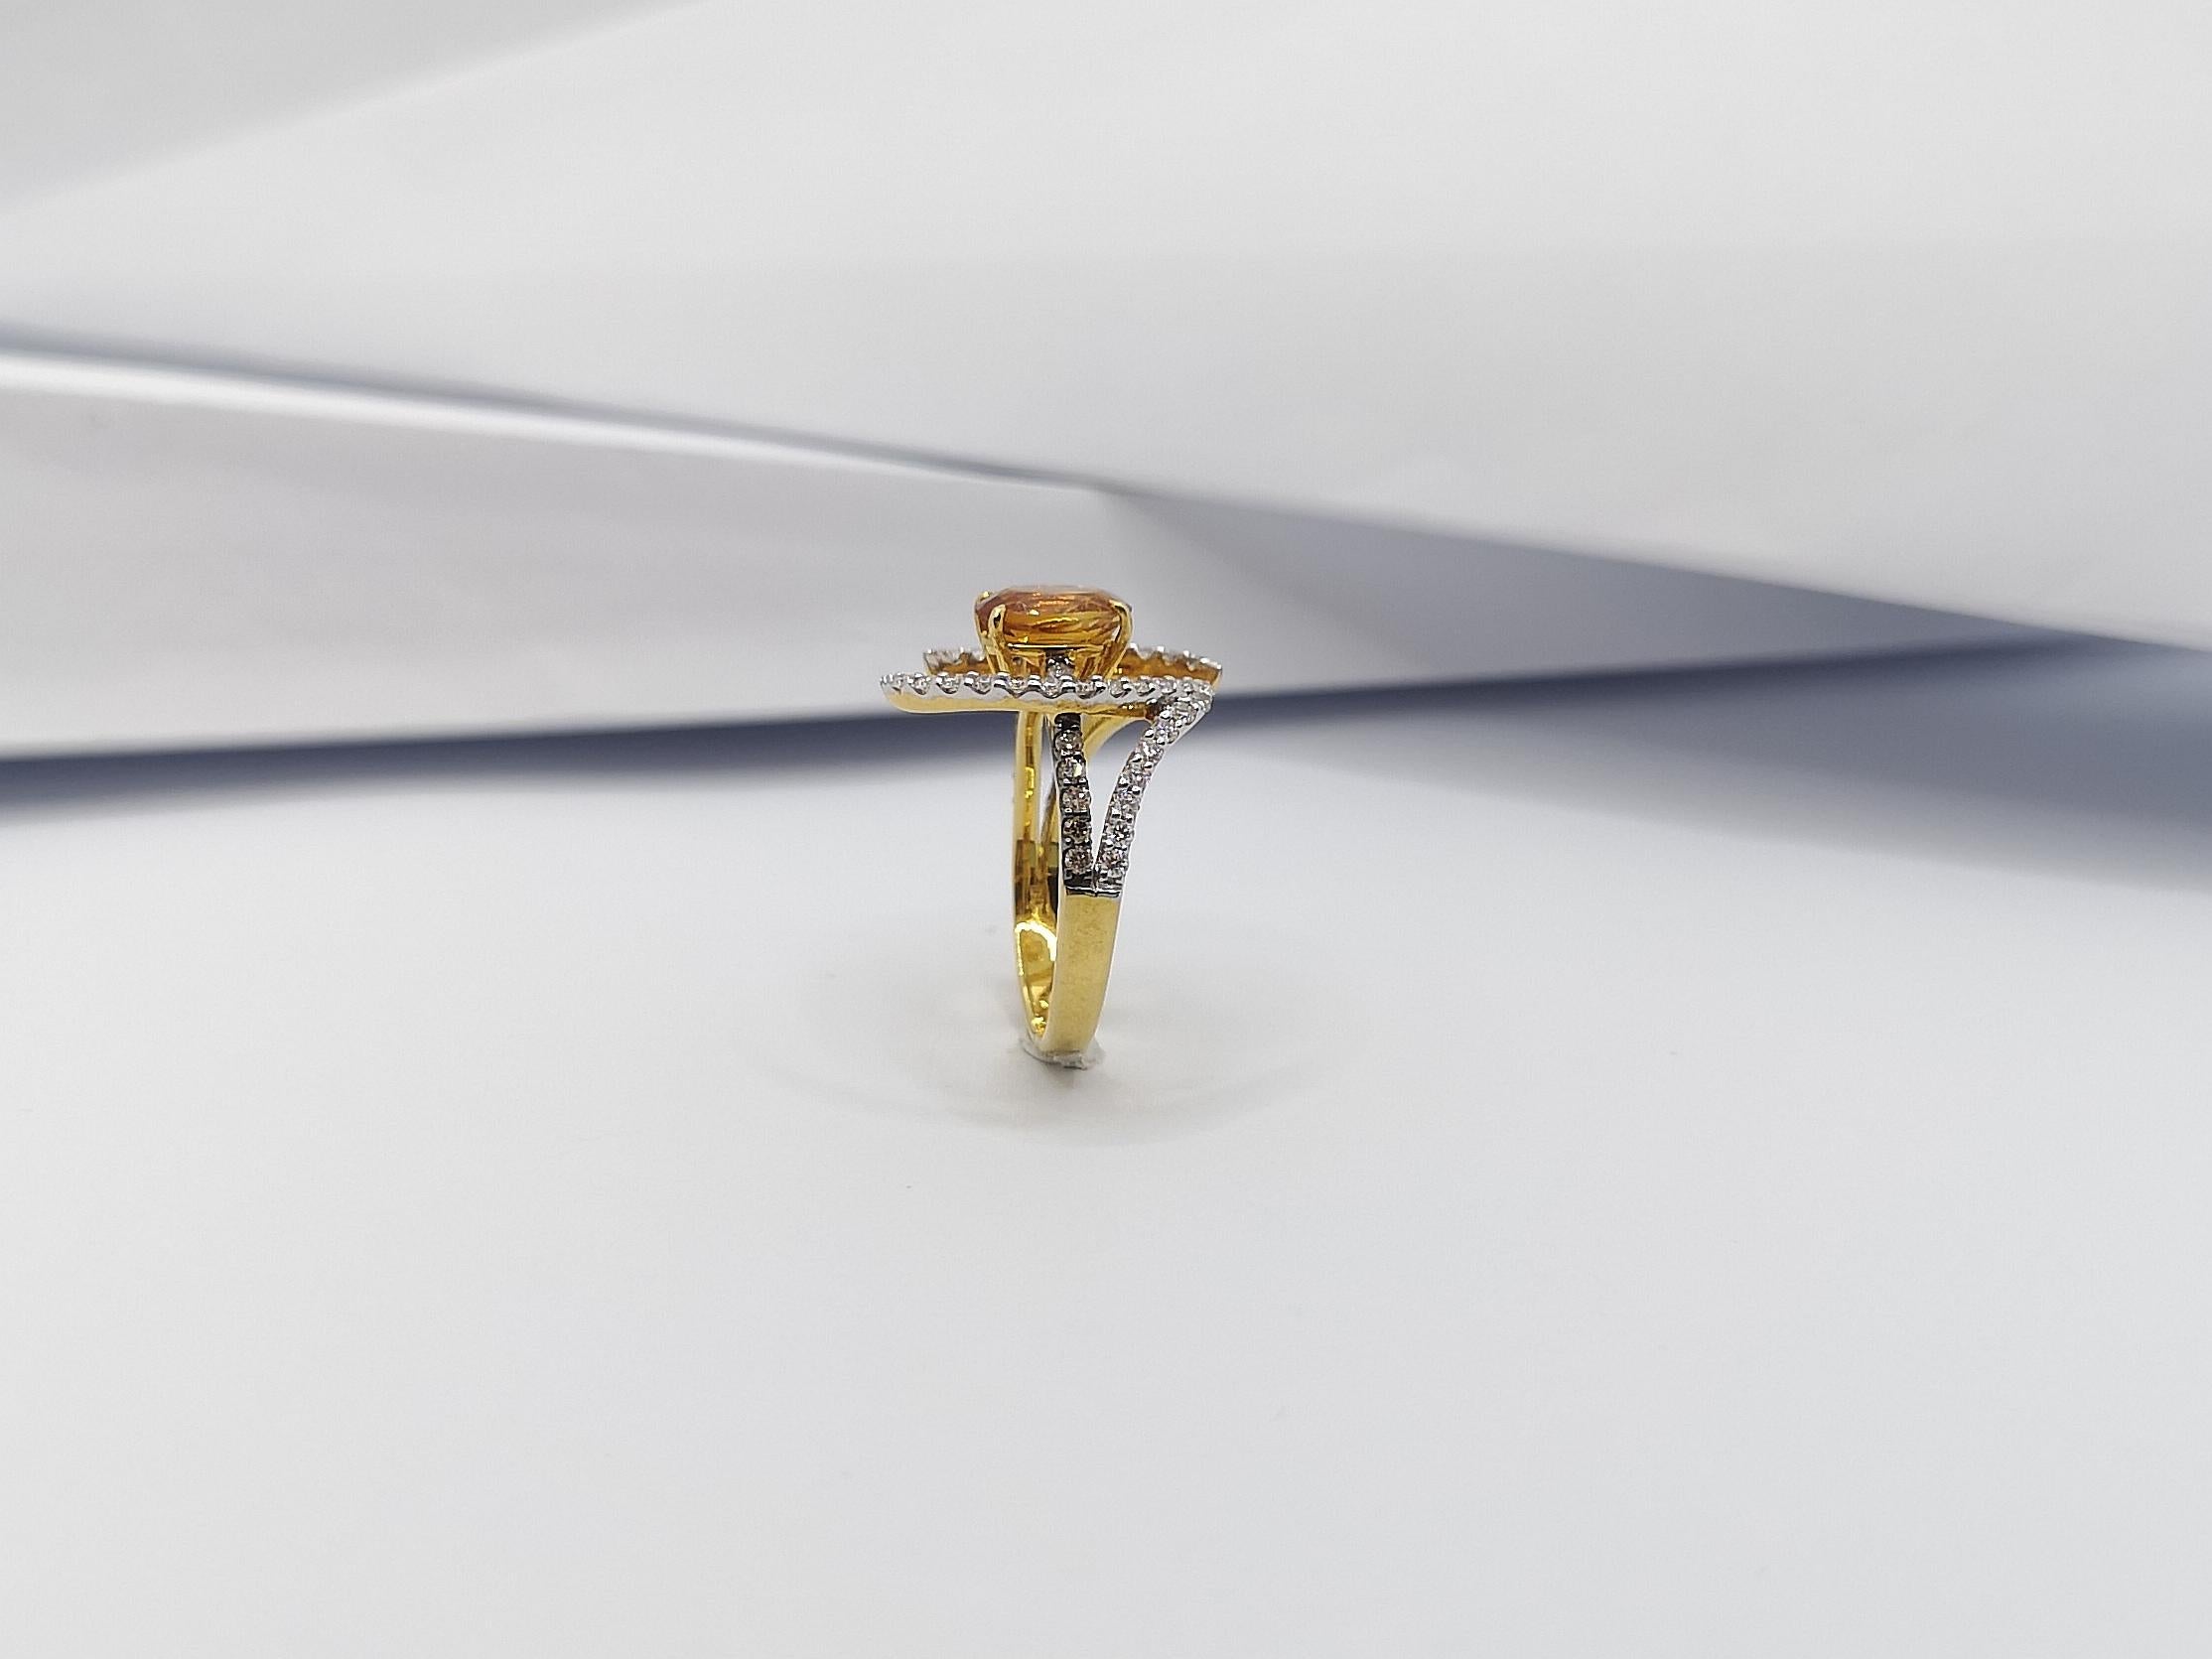 Citrine, Brown Diamond and Diamond Ring Set in 18k Gold by Kavant & Sharart 8